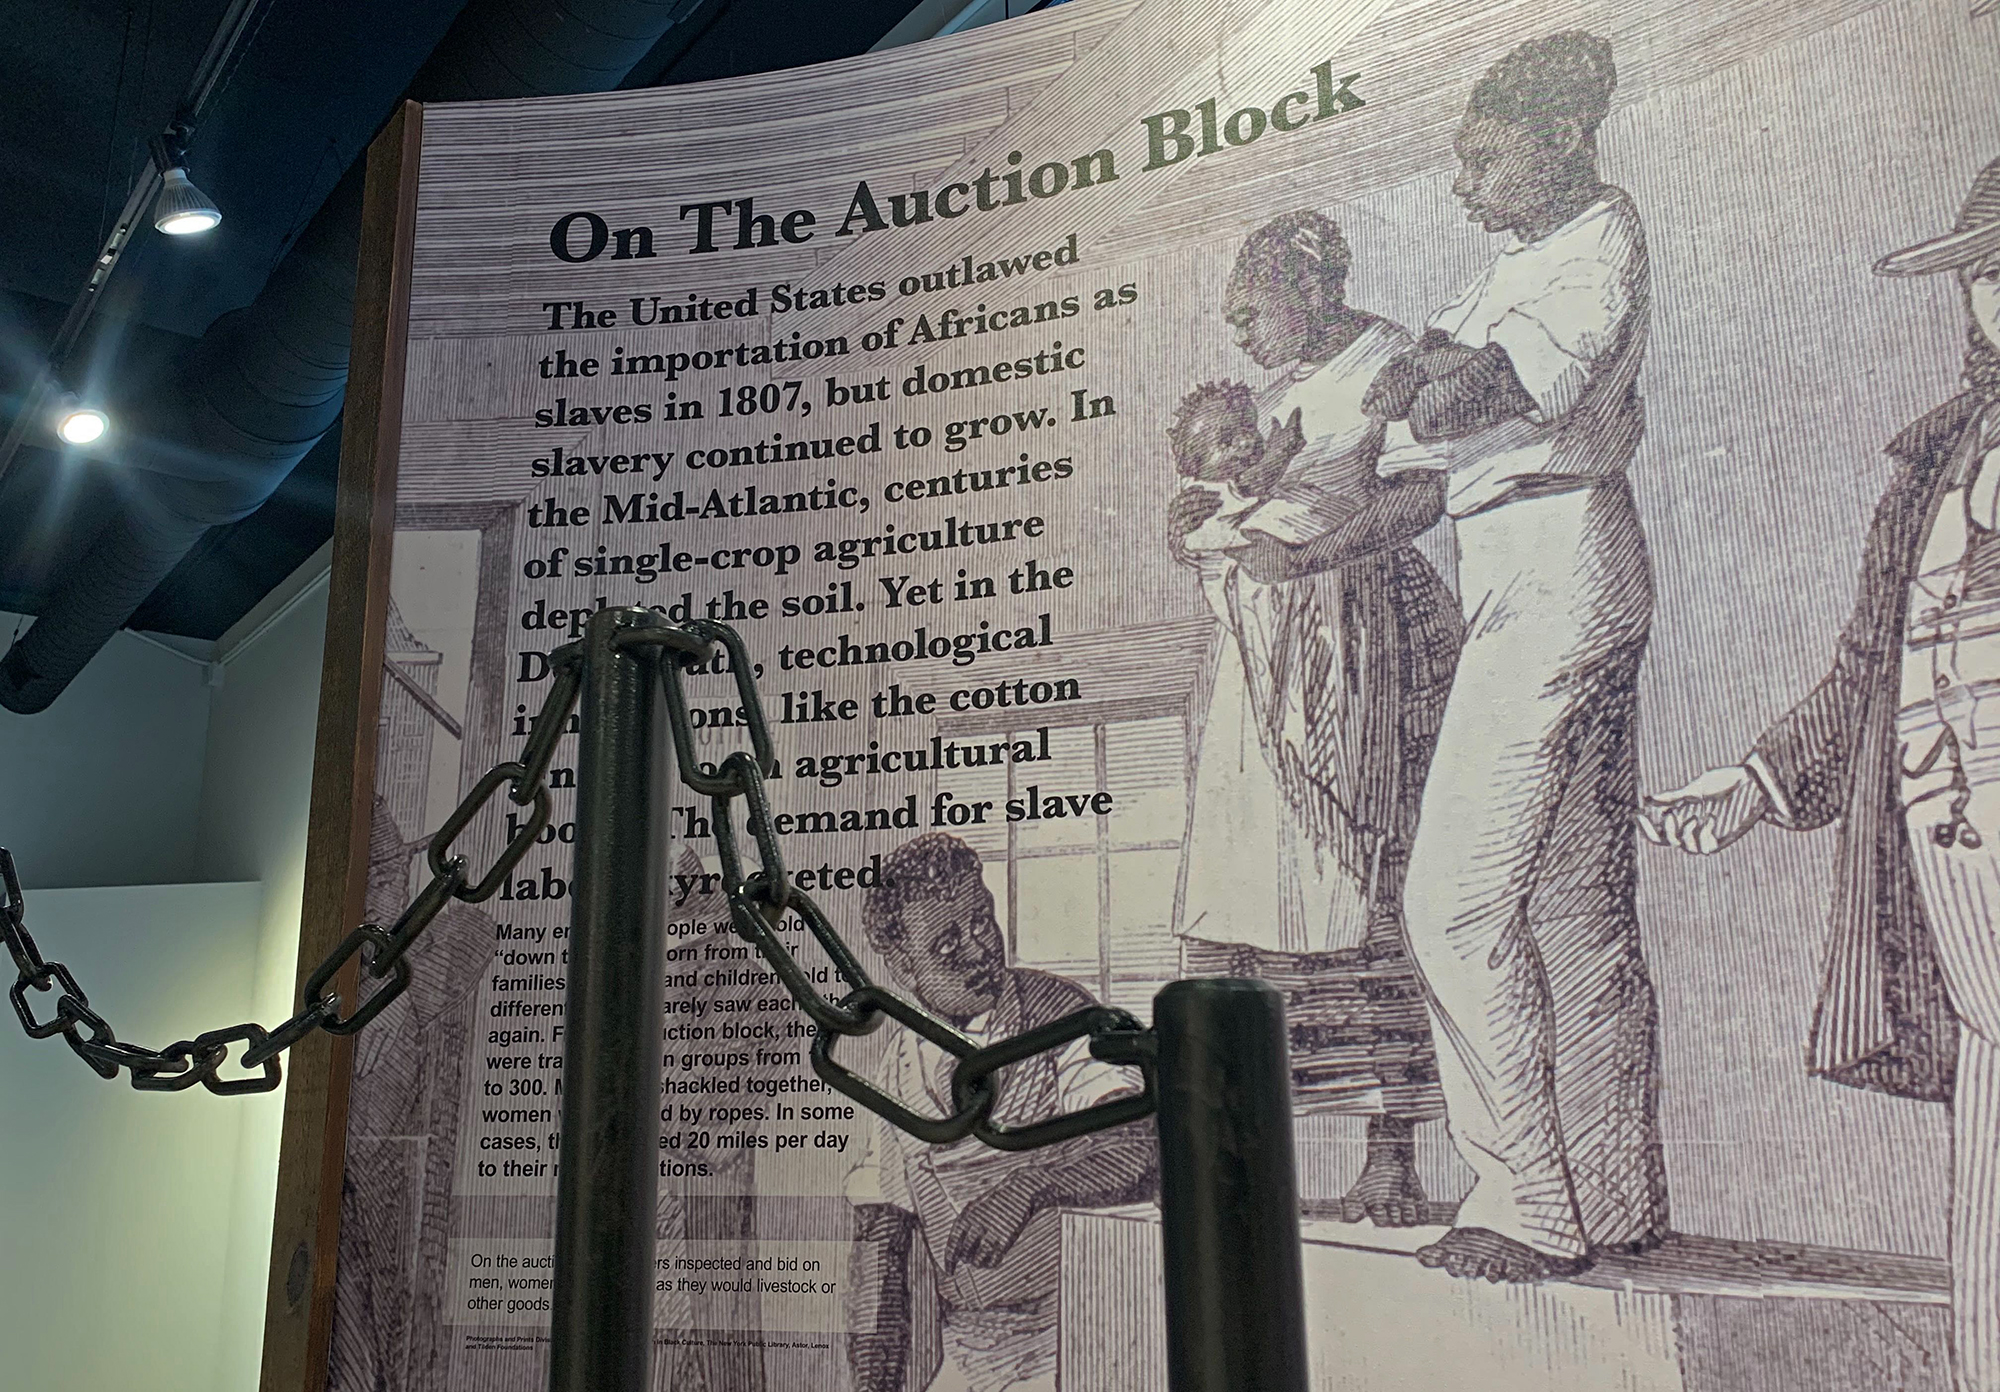 America’s Black Holocaust Museum Hopes To Reopen Its Doors This Year